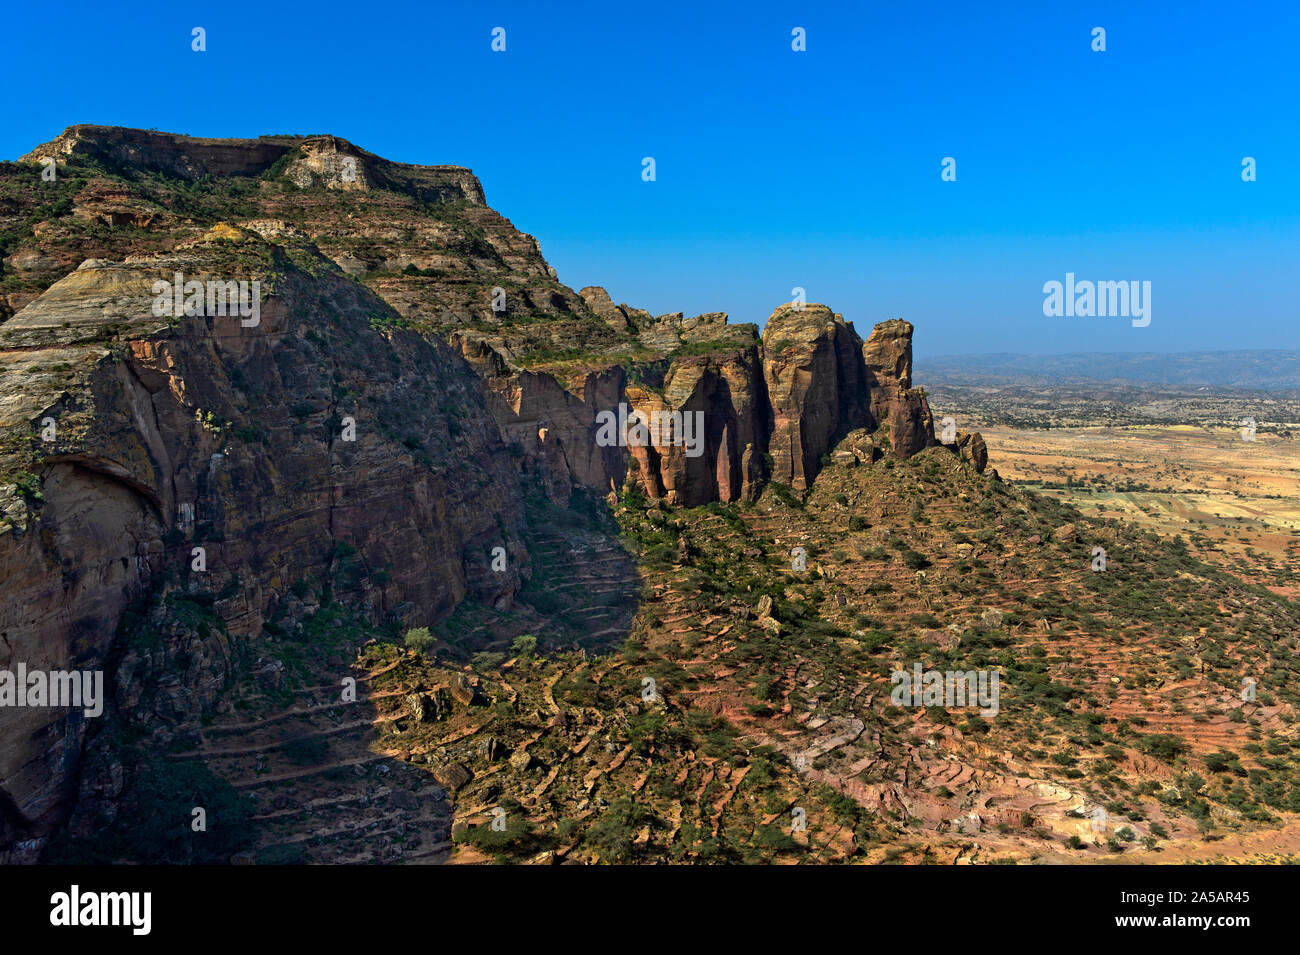 Gheralta Mountains, northern part of the East African Rift Valley, Hawzien, Tigray, Ethiopia Stock Photo